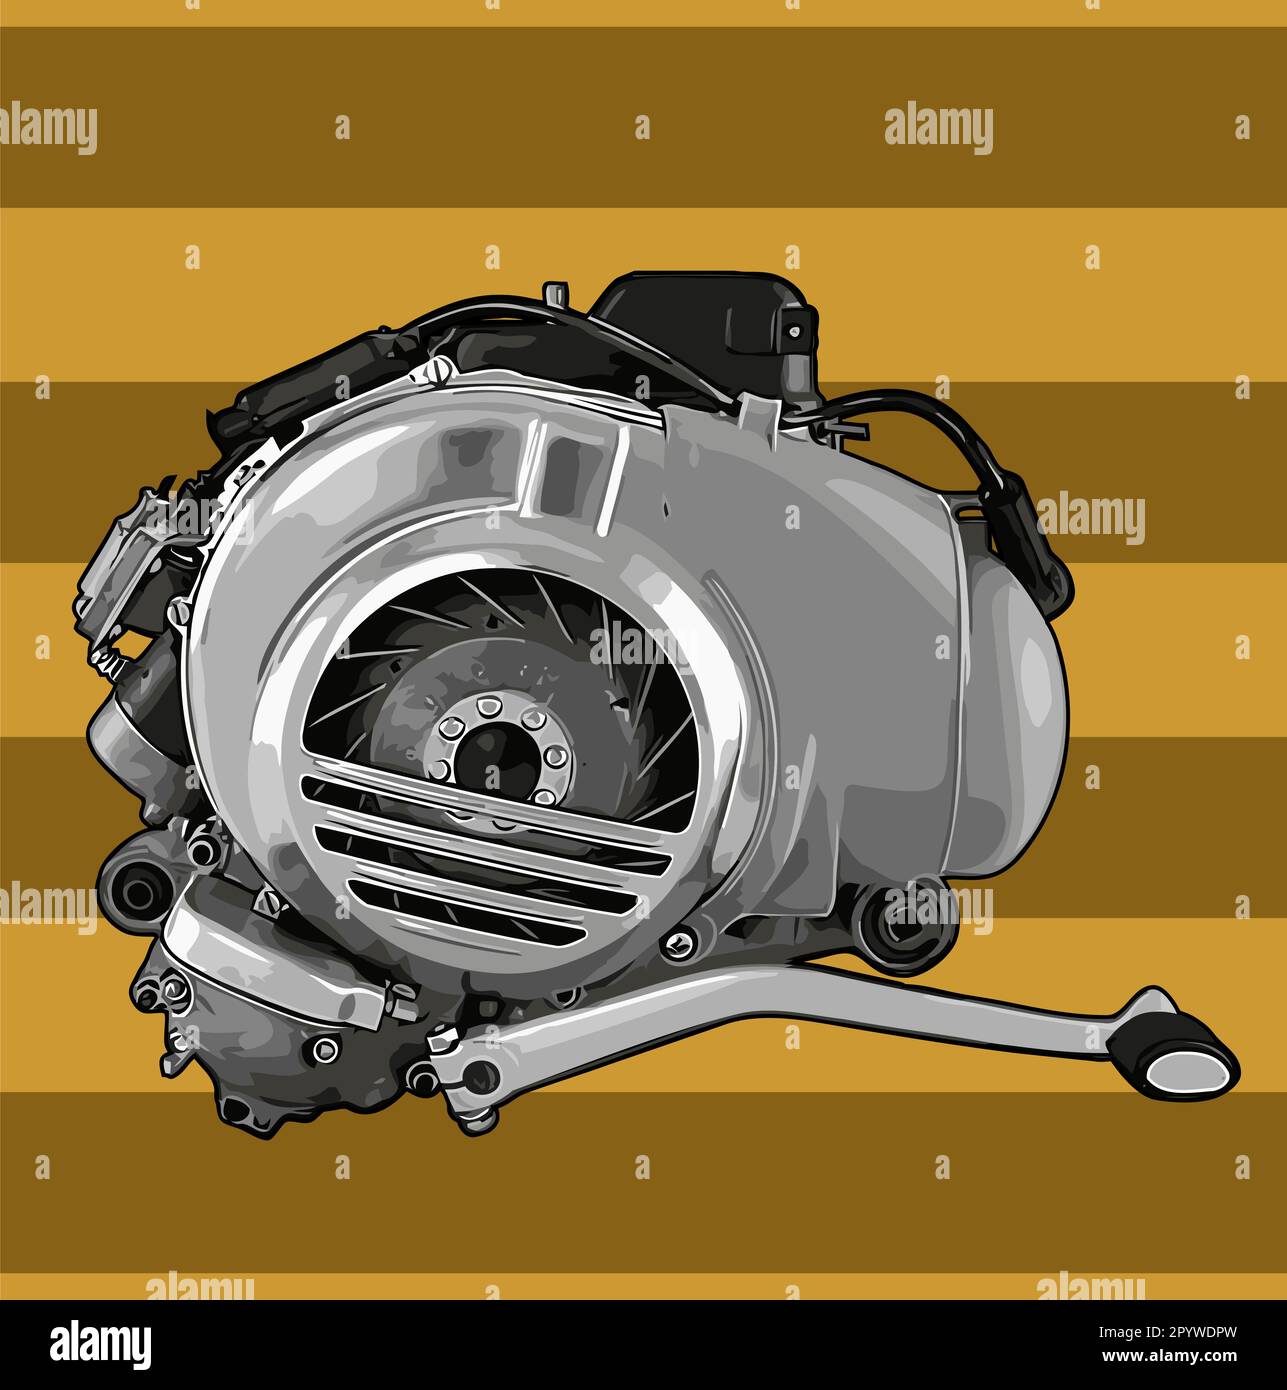 classic scooter engine Stock Vector